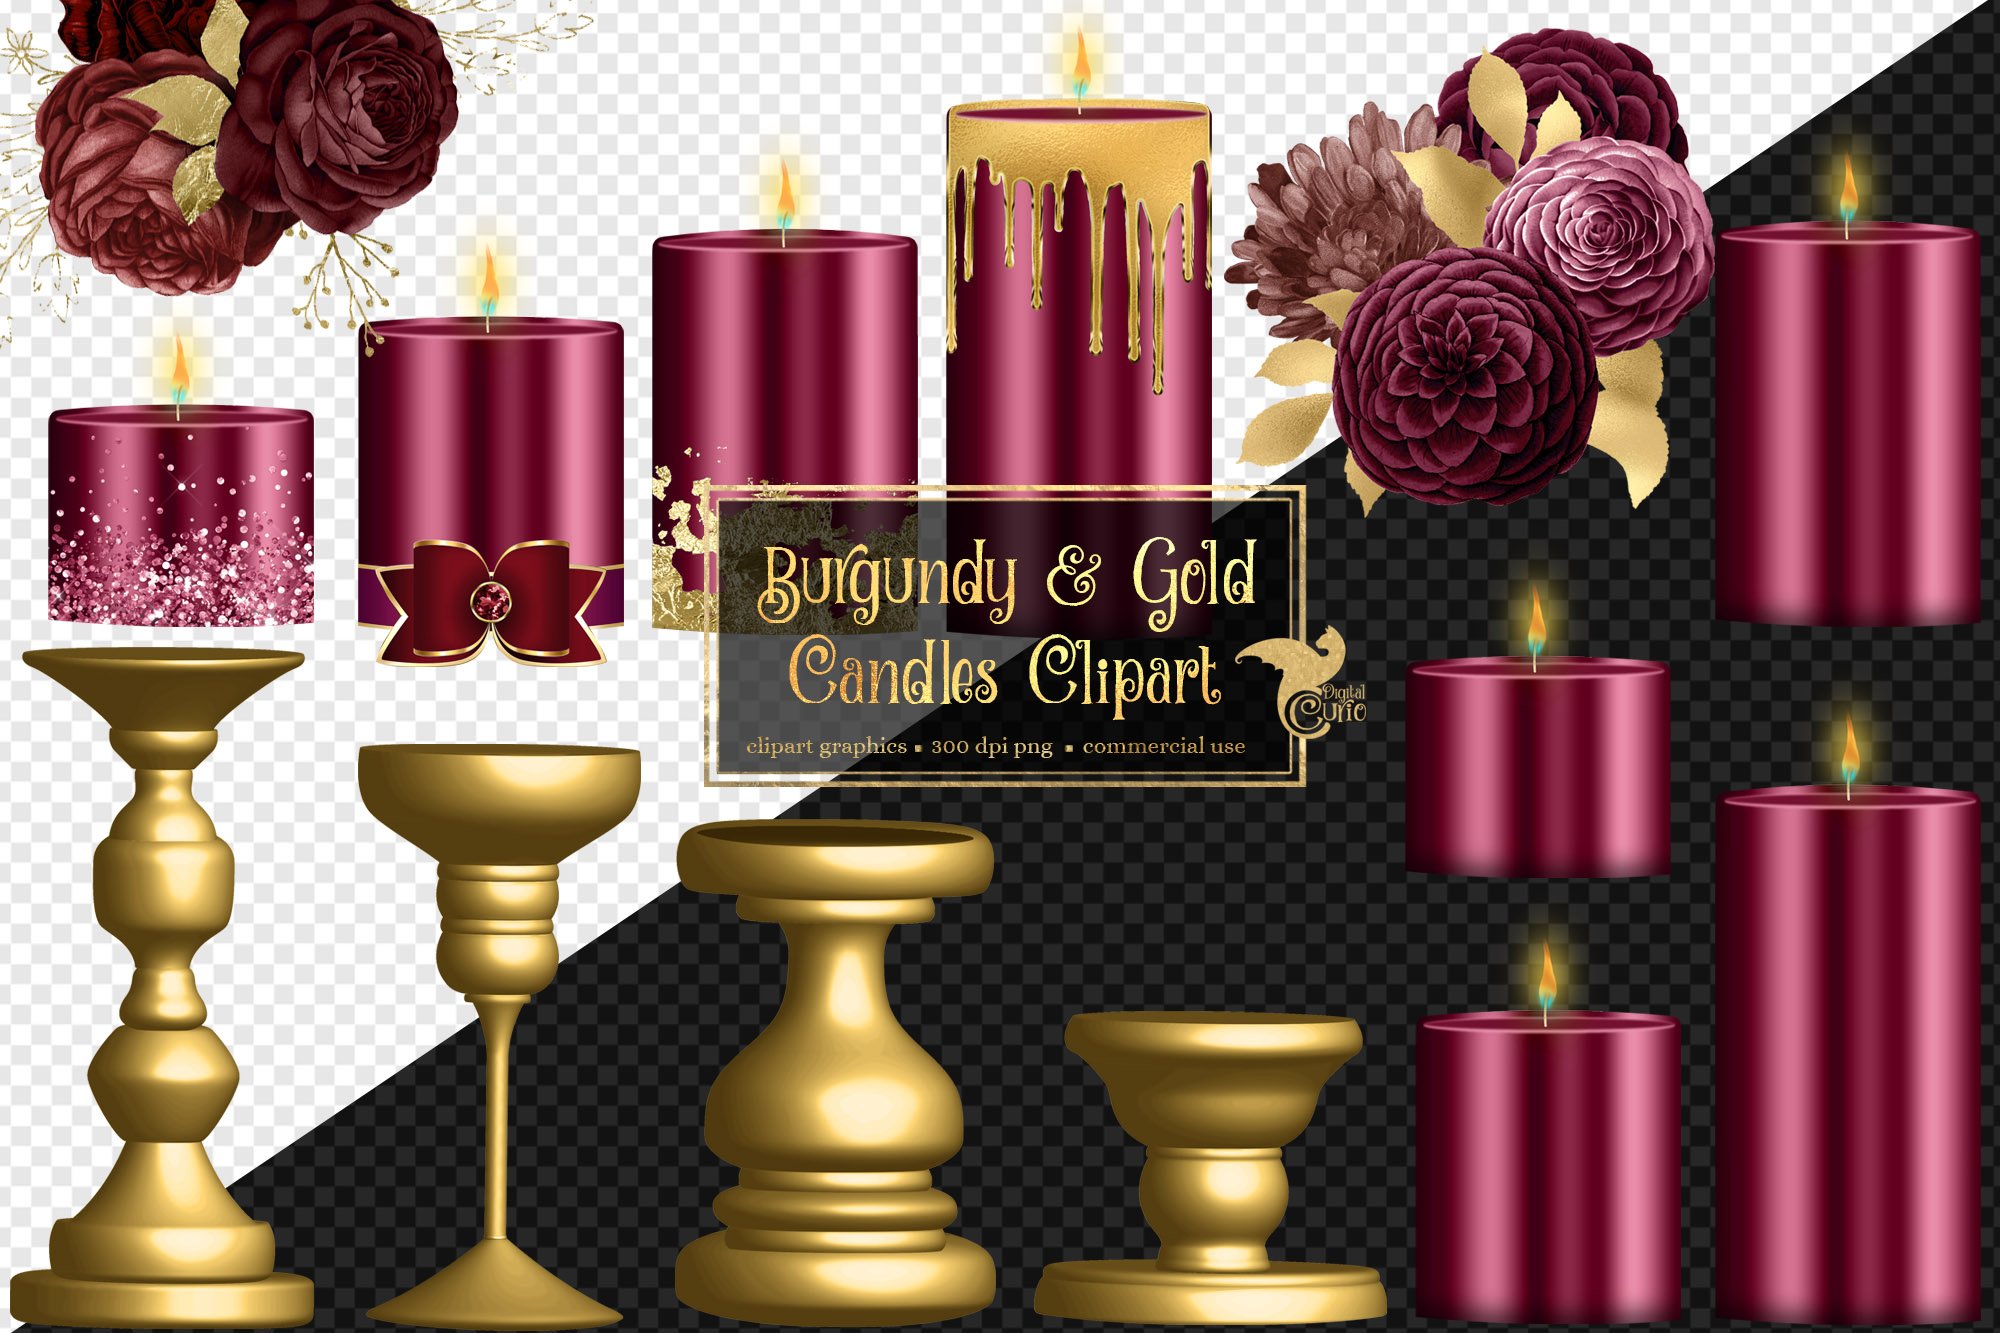 Burgundy and Gold Candle Clipart preview image.